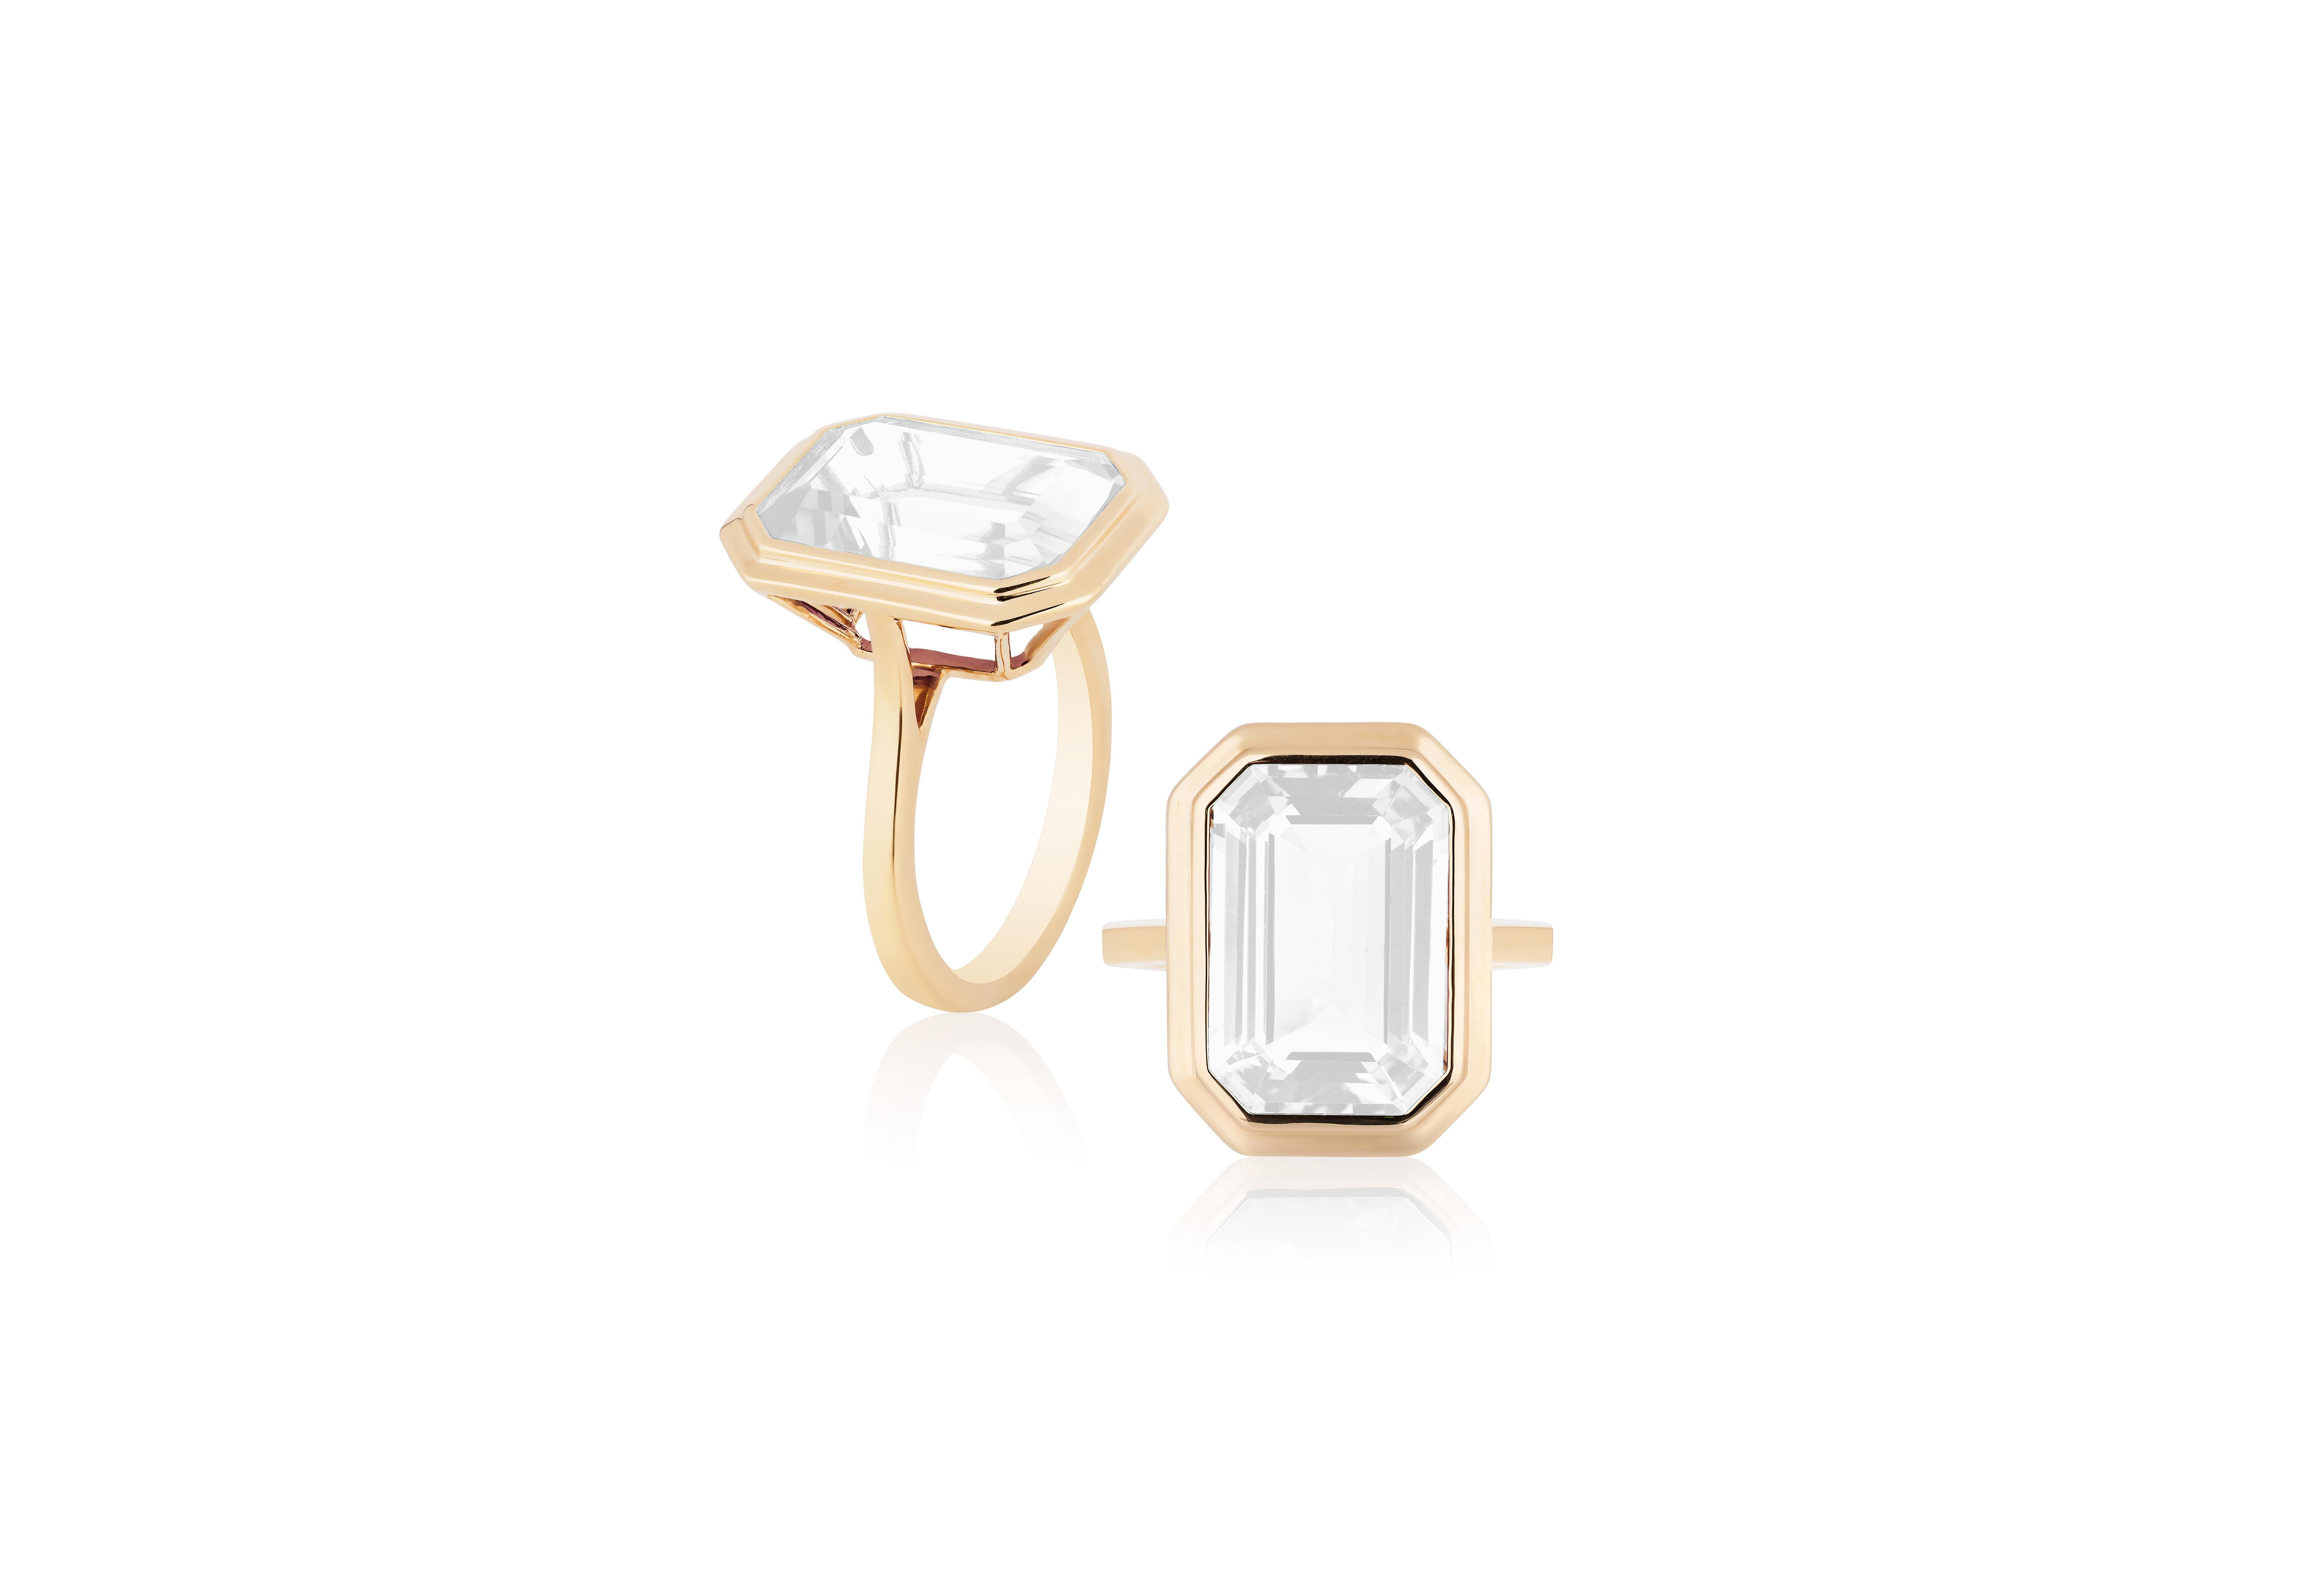 A classic yet an everyday bold statement piece, this amazing cocktail ring is part of our very new ‘Manhattan’ Collection. It has a 10 x 15 mm emerald cut Moon Quartz in a bezel setting in 18k gold   ​

Minimalist lines yet bold structures is what